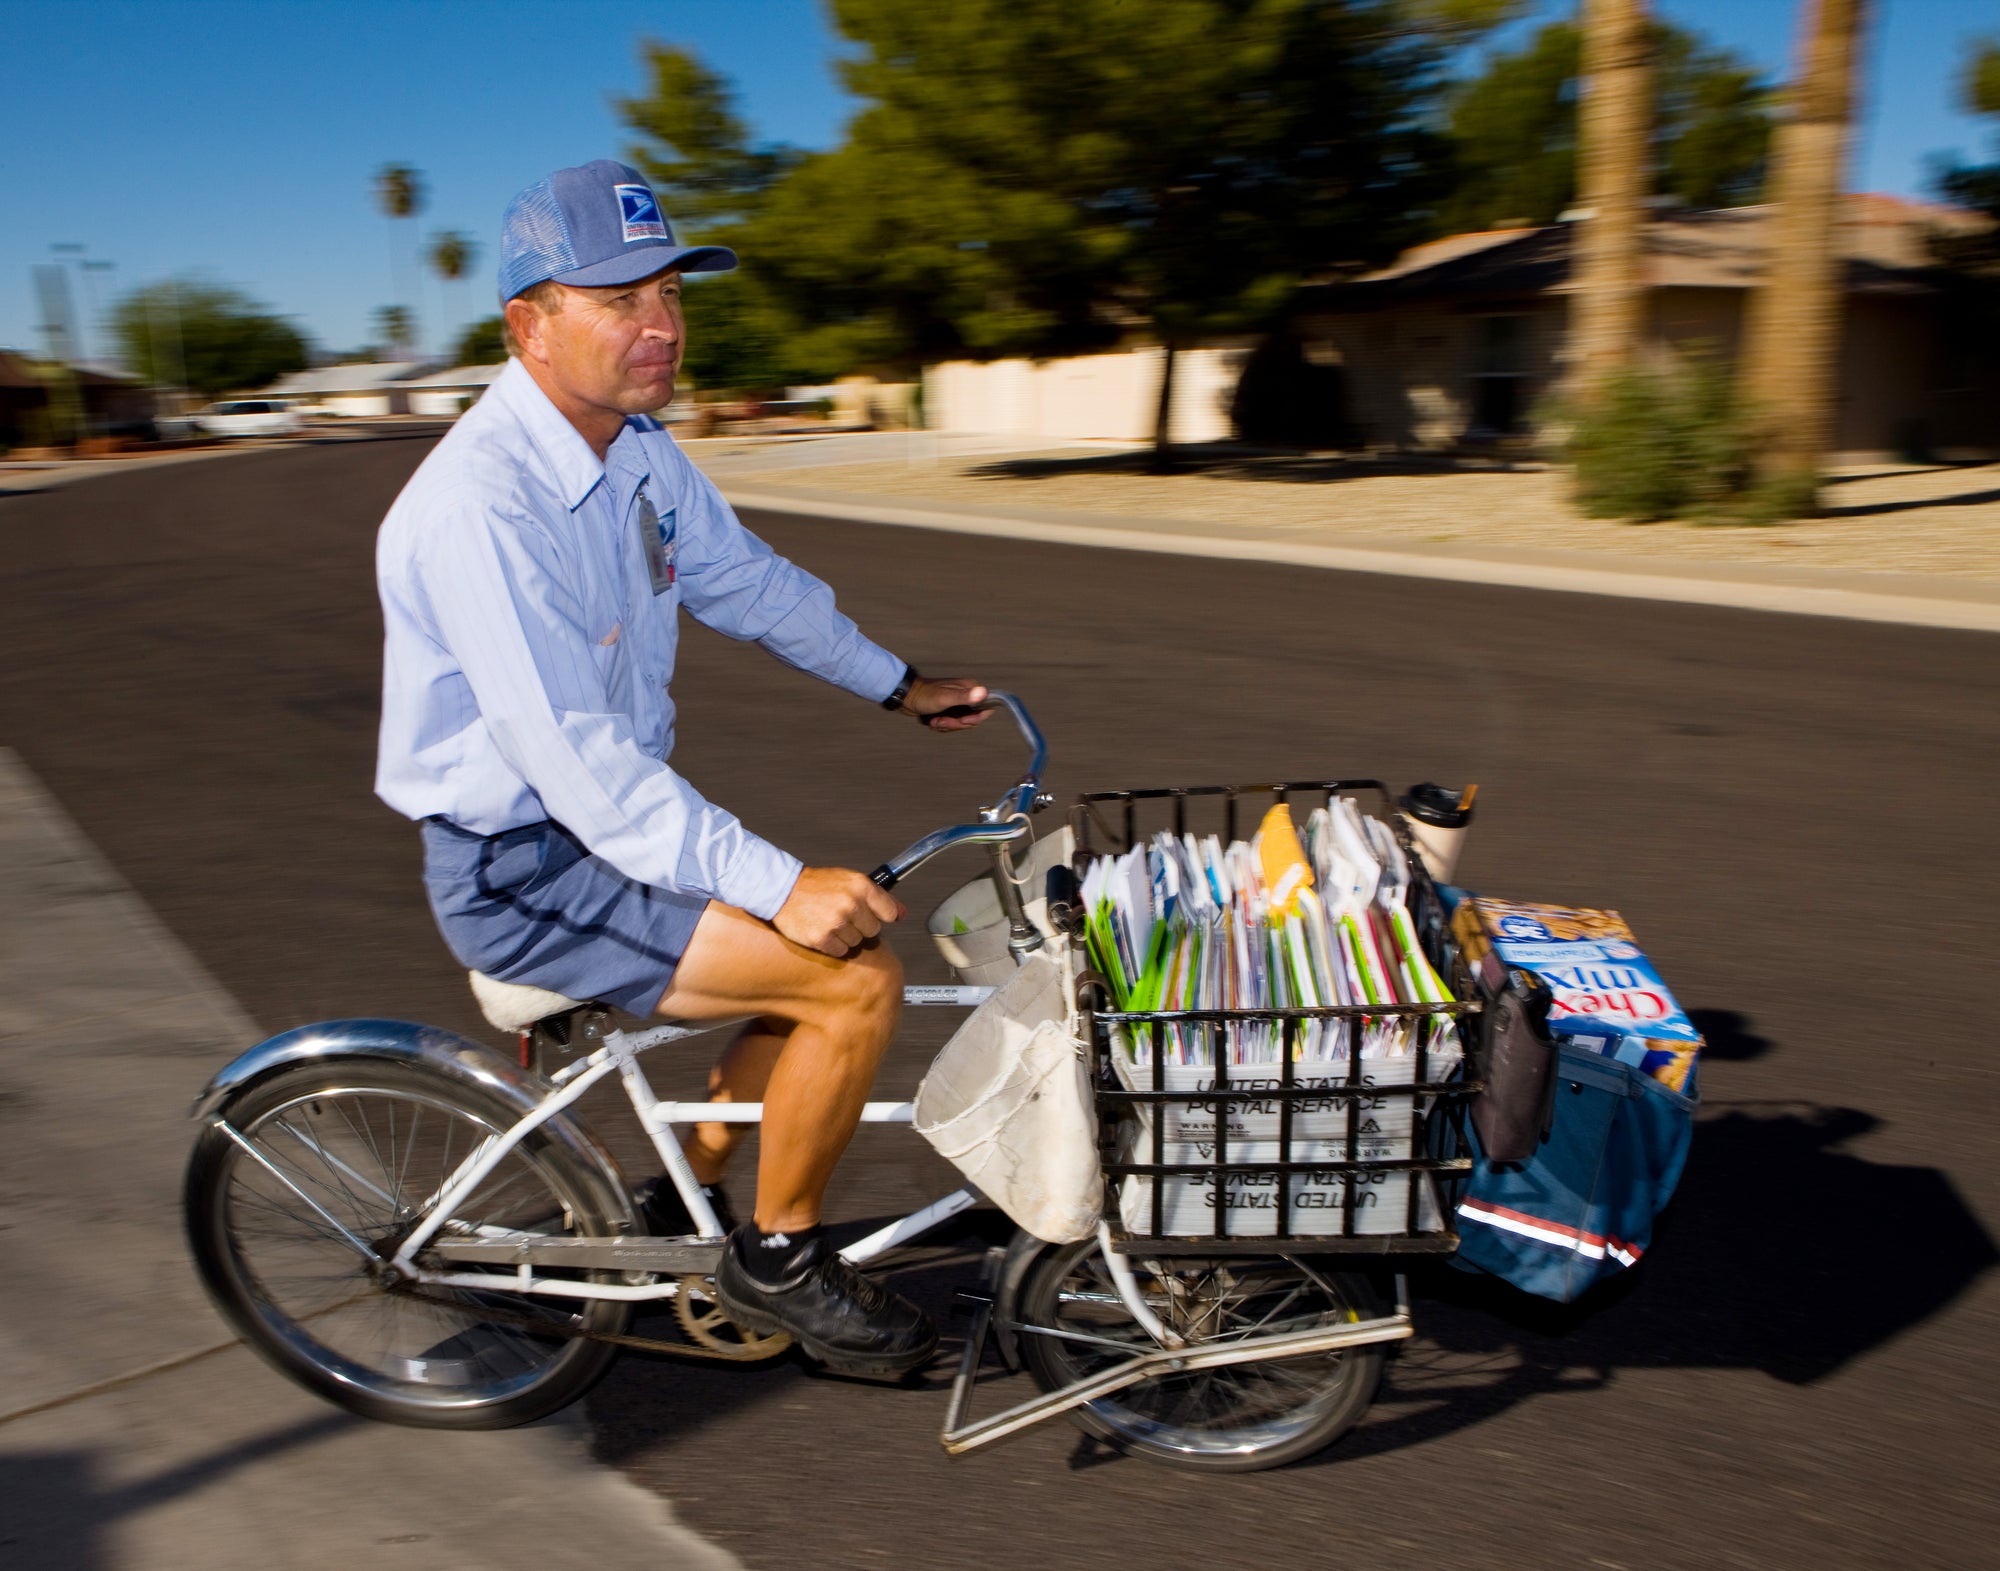 USPS Mail Delivery Person on a Bicycle in Sunny California Photo Credit United States Postal Service